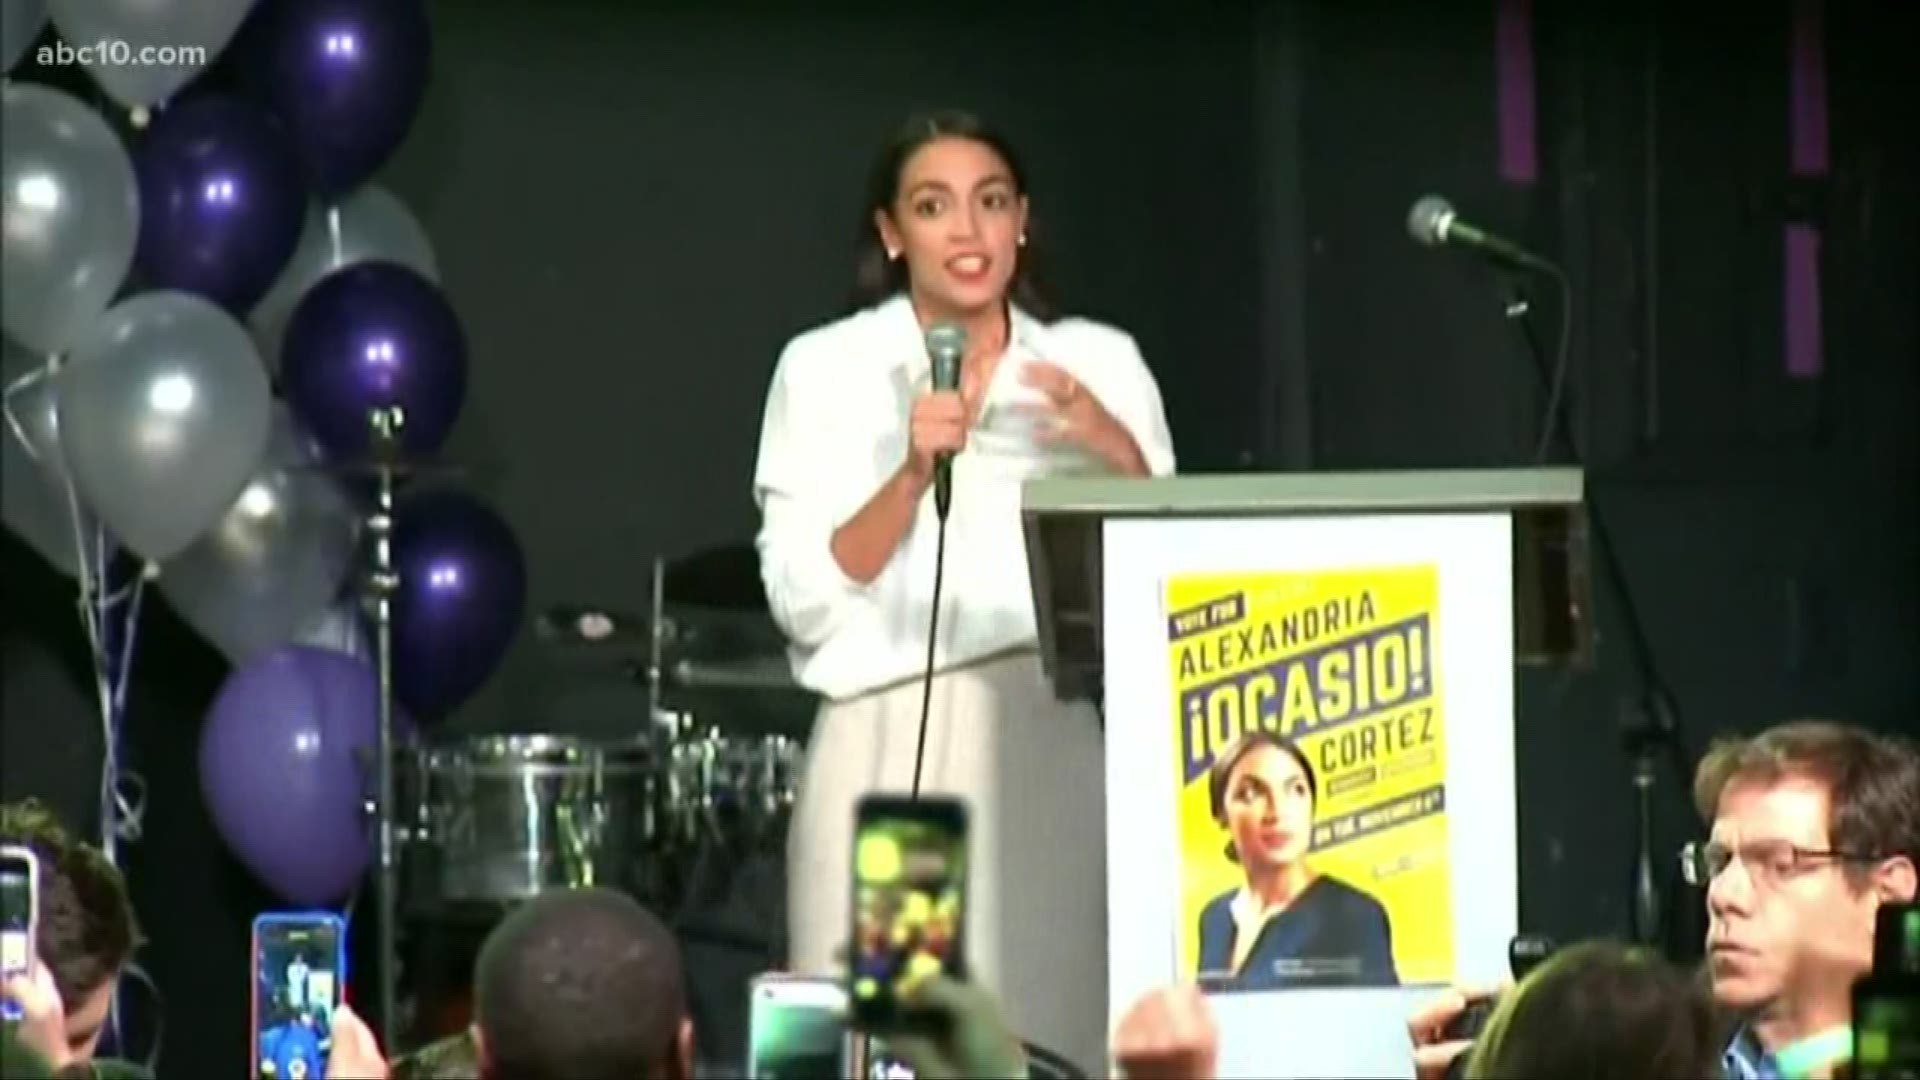 Newly-elected Alexandria Ocasio-Cortez has been one of the hottest topics on social media since she stepped into the spotlight. Now that she's earned her seat in New York, some are questioning whether or not she's too young to be in Congress.